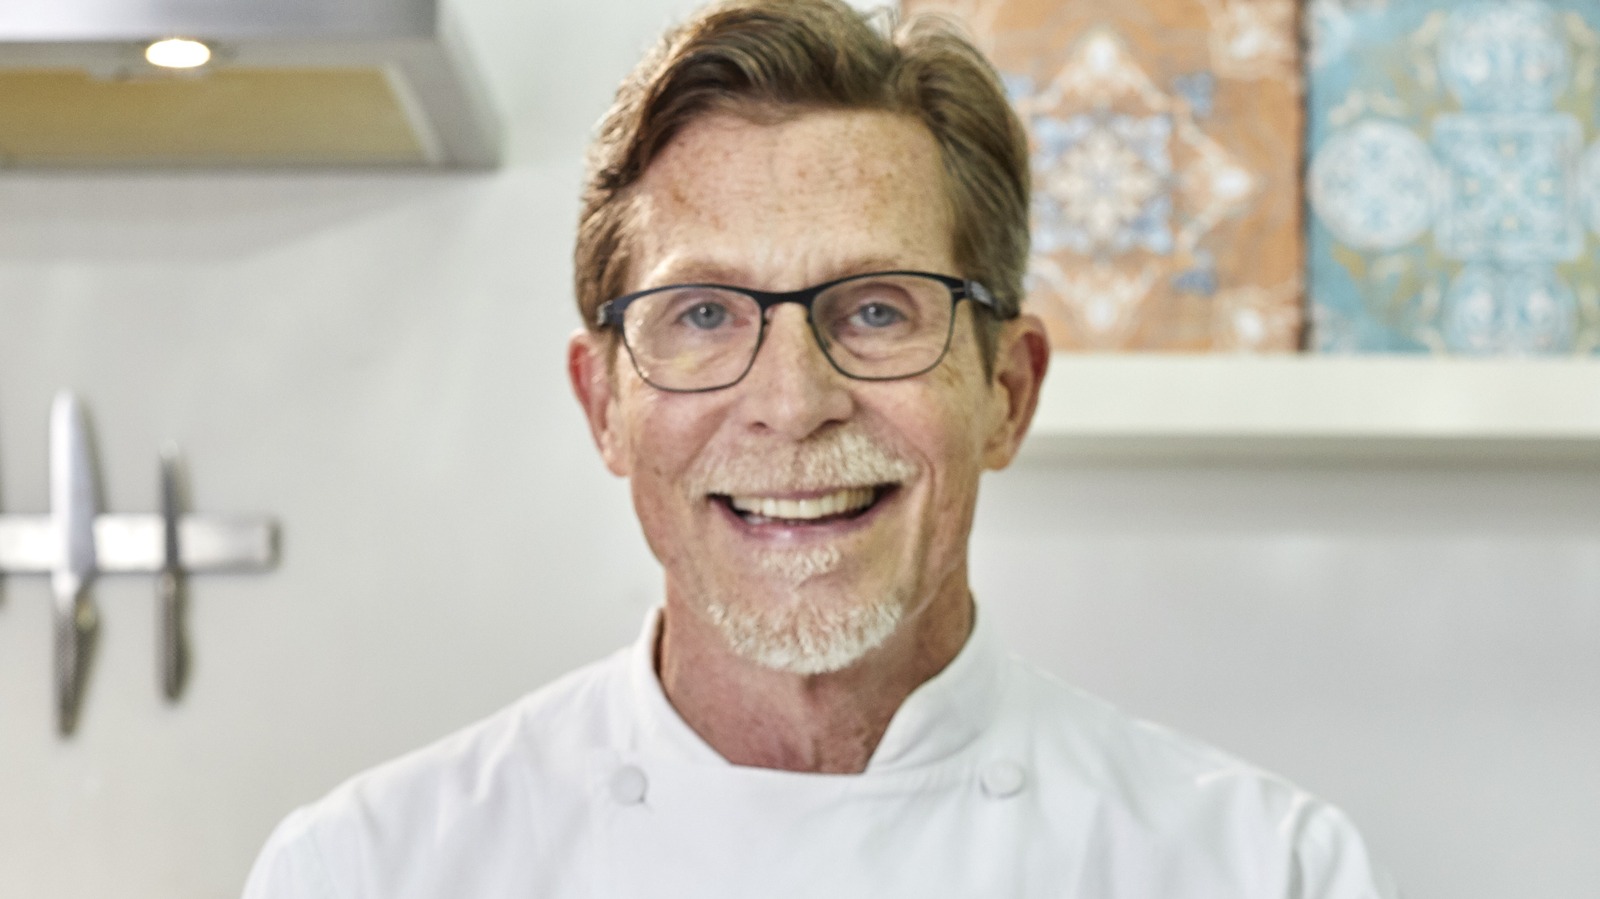 Smiling Rick Bayless wearing a white chef uniform